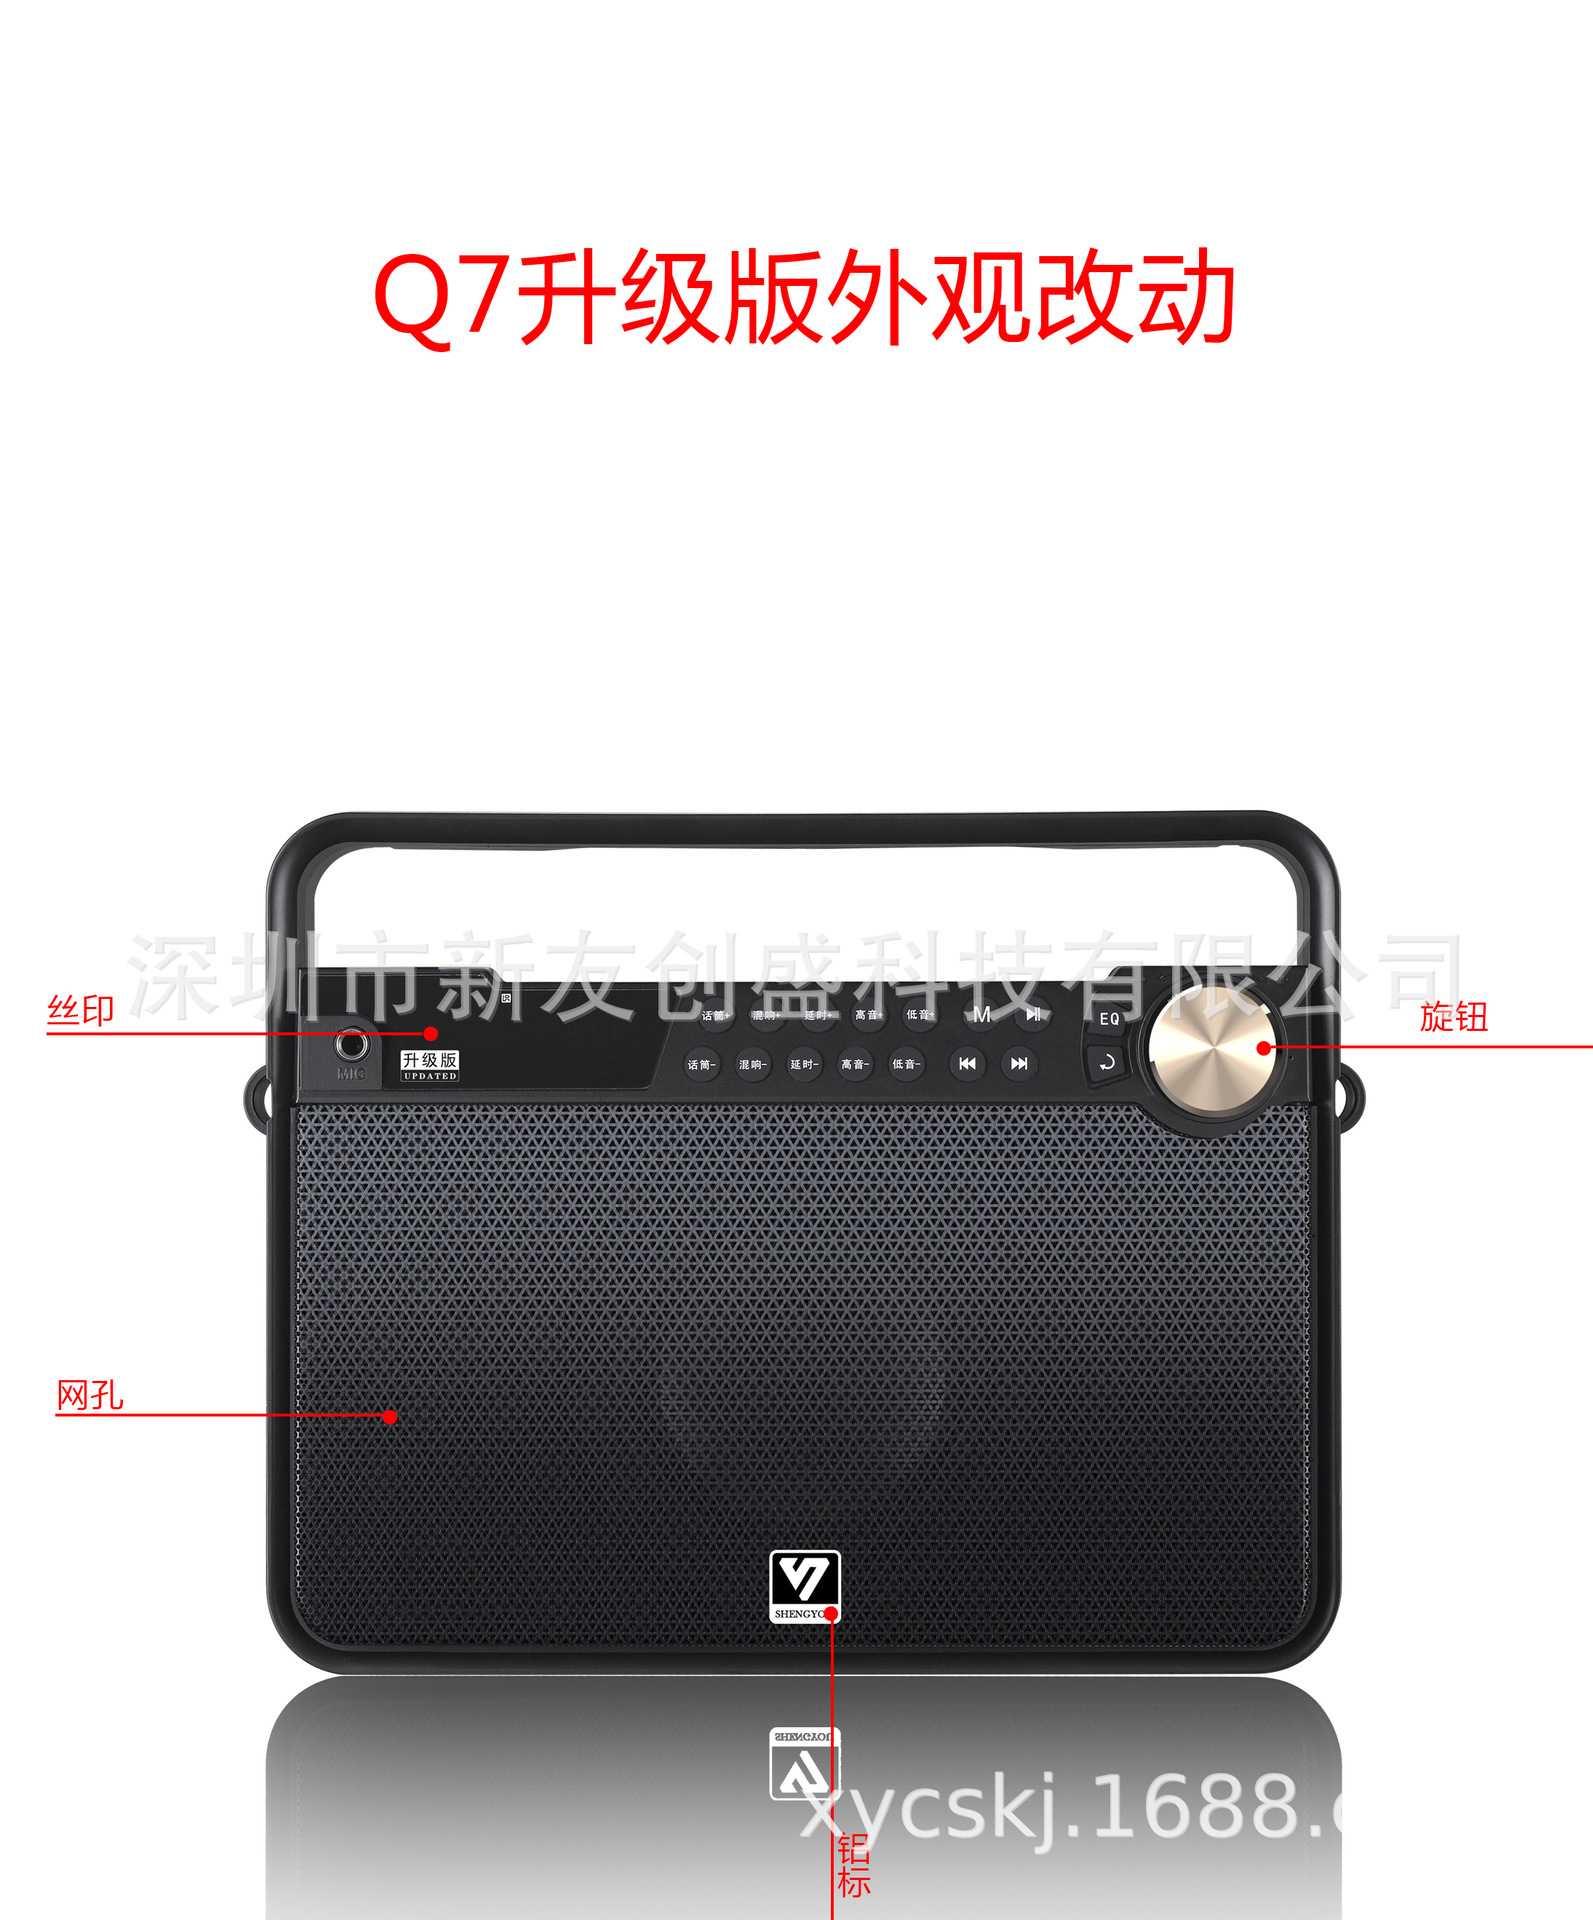 Shengyou Q7 Outdoor Portable Wireless Microphone Mobile Karaoke Portable Portable Square Dance Singing Rechargeable Speaker